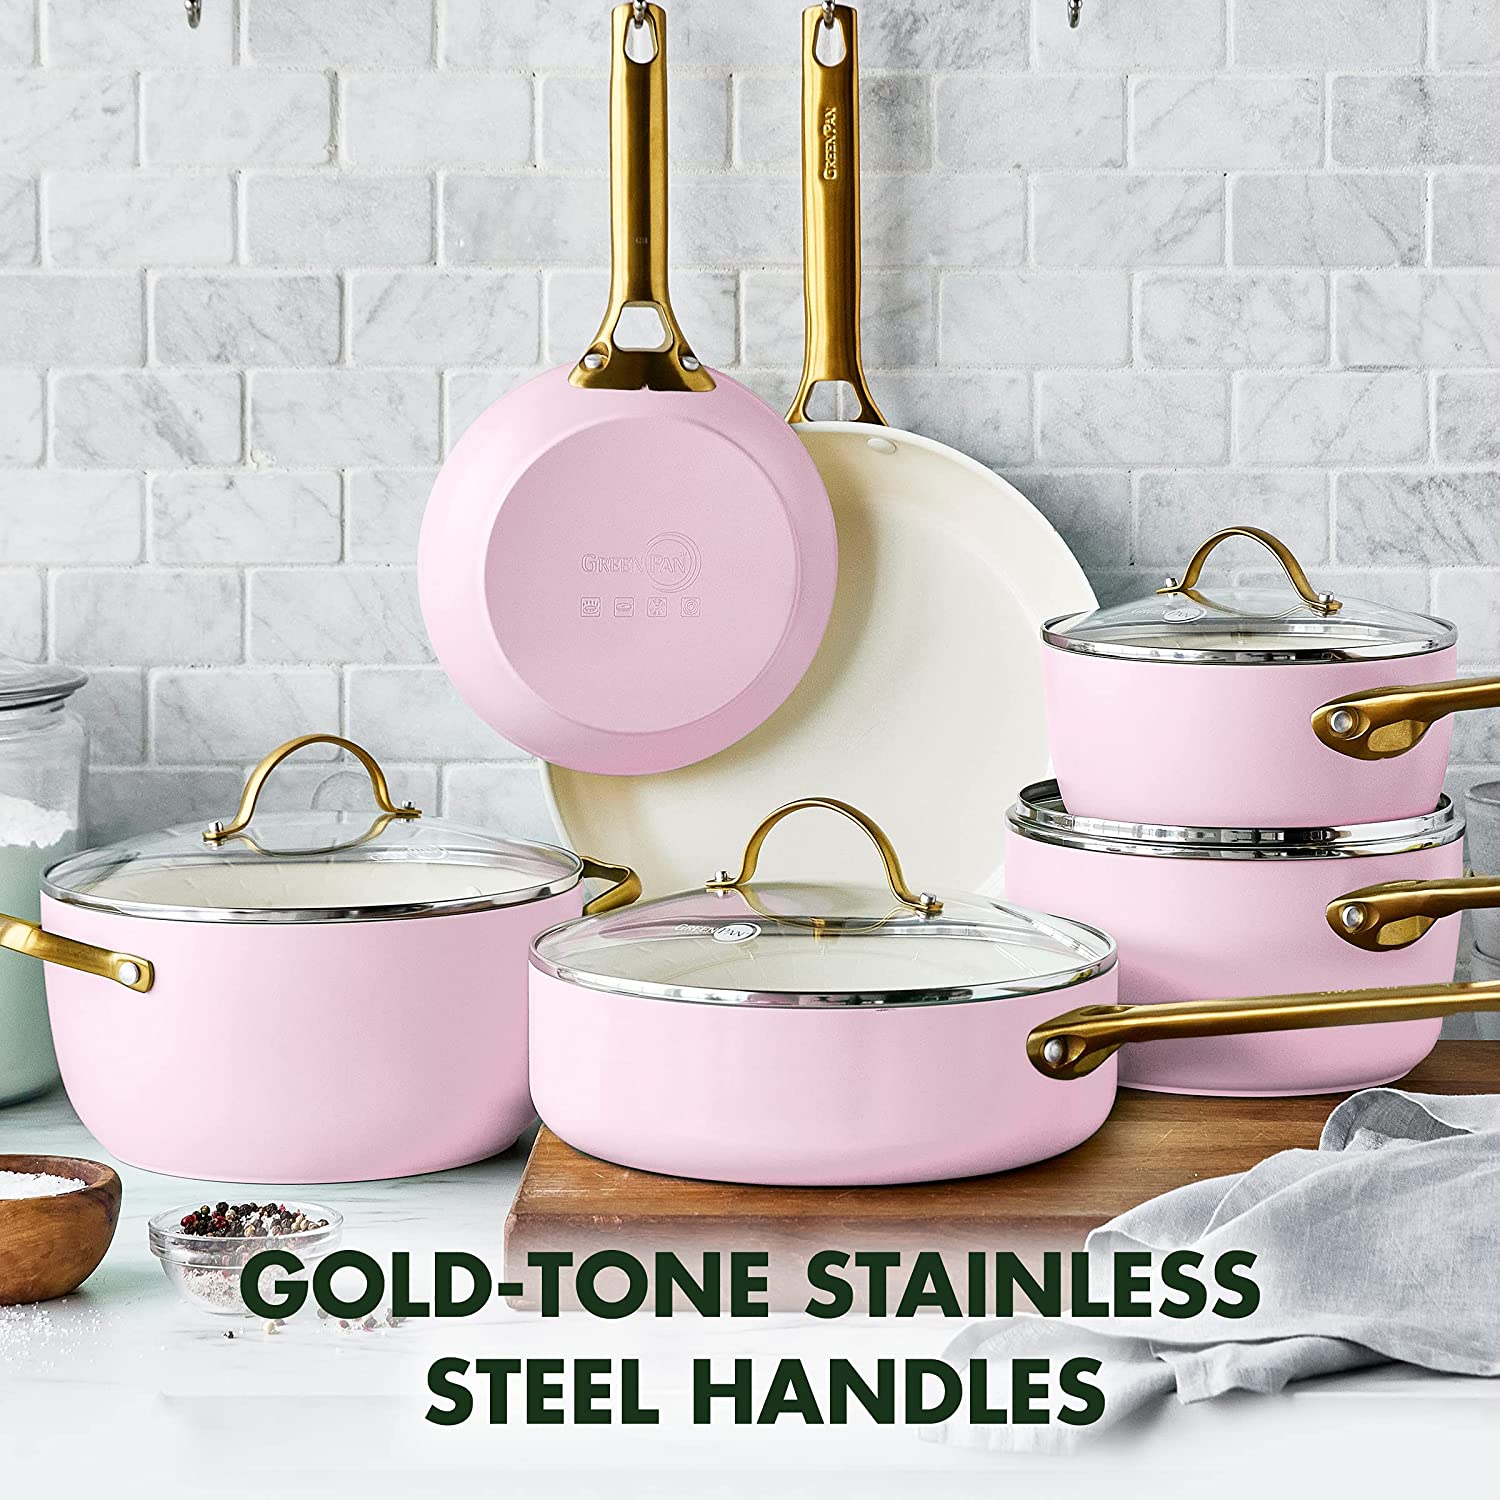 Give your Kitchen the Feminine Touch with these Cool Pink Pots and